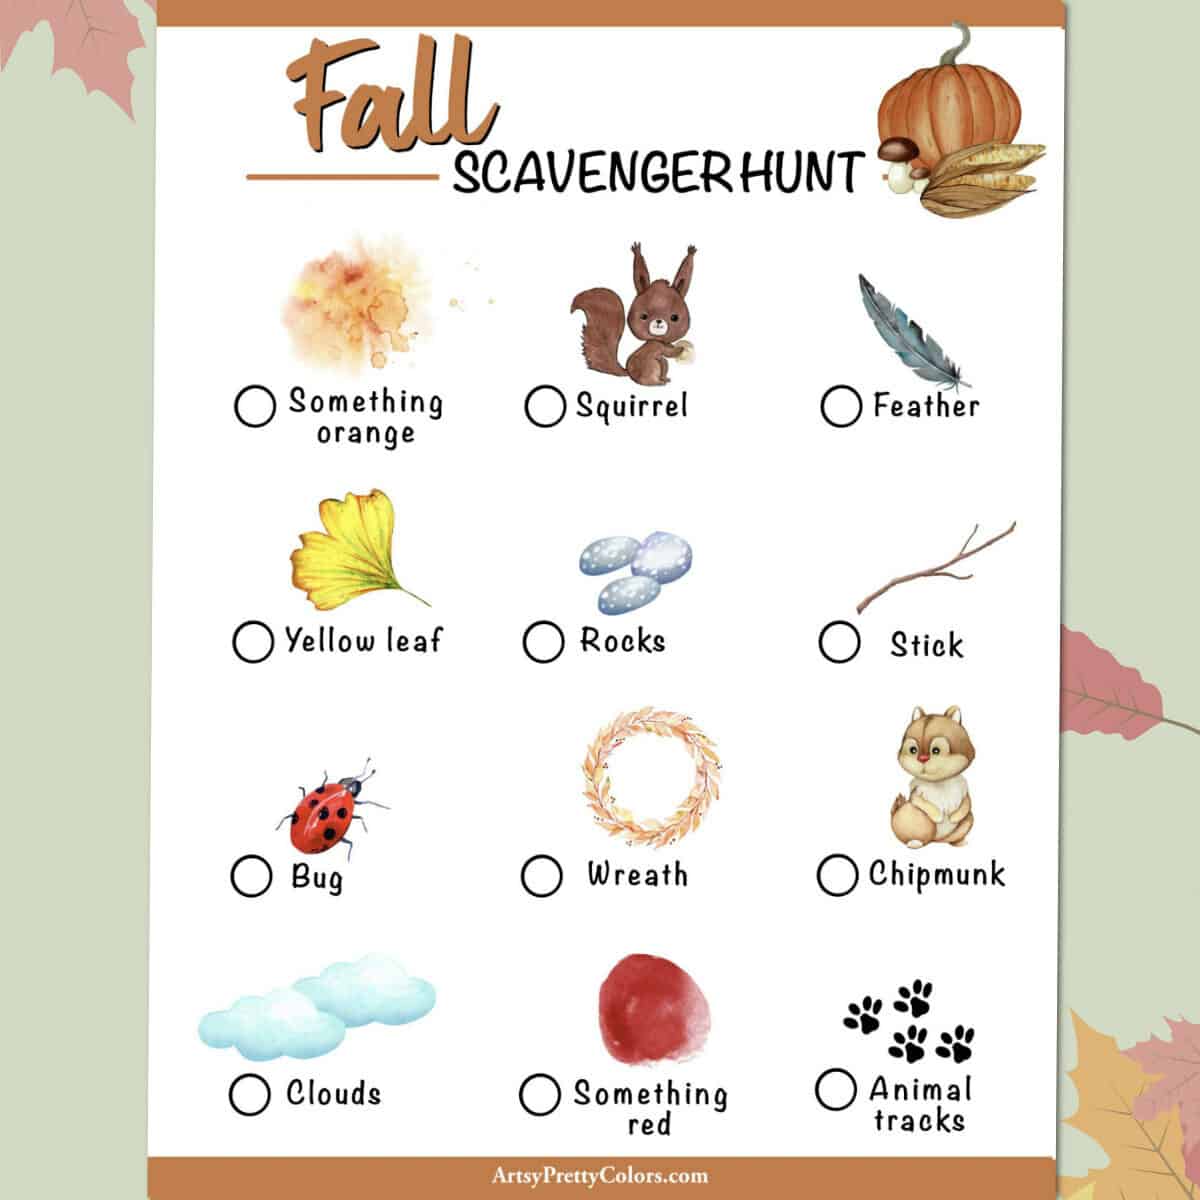 A printable scavenger hunt with images of fall themed items with check boxes next to them.